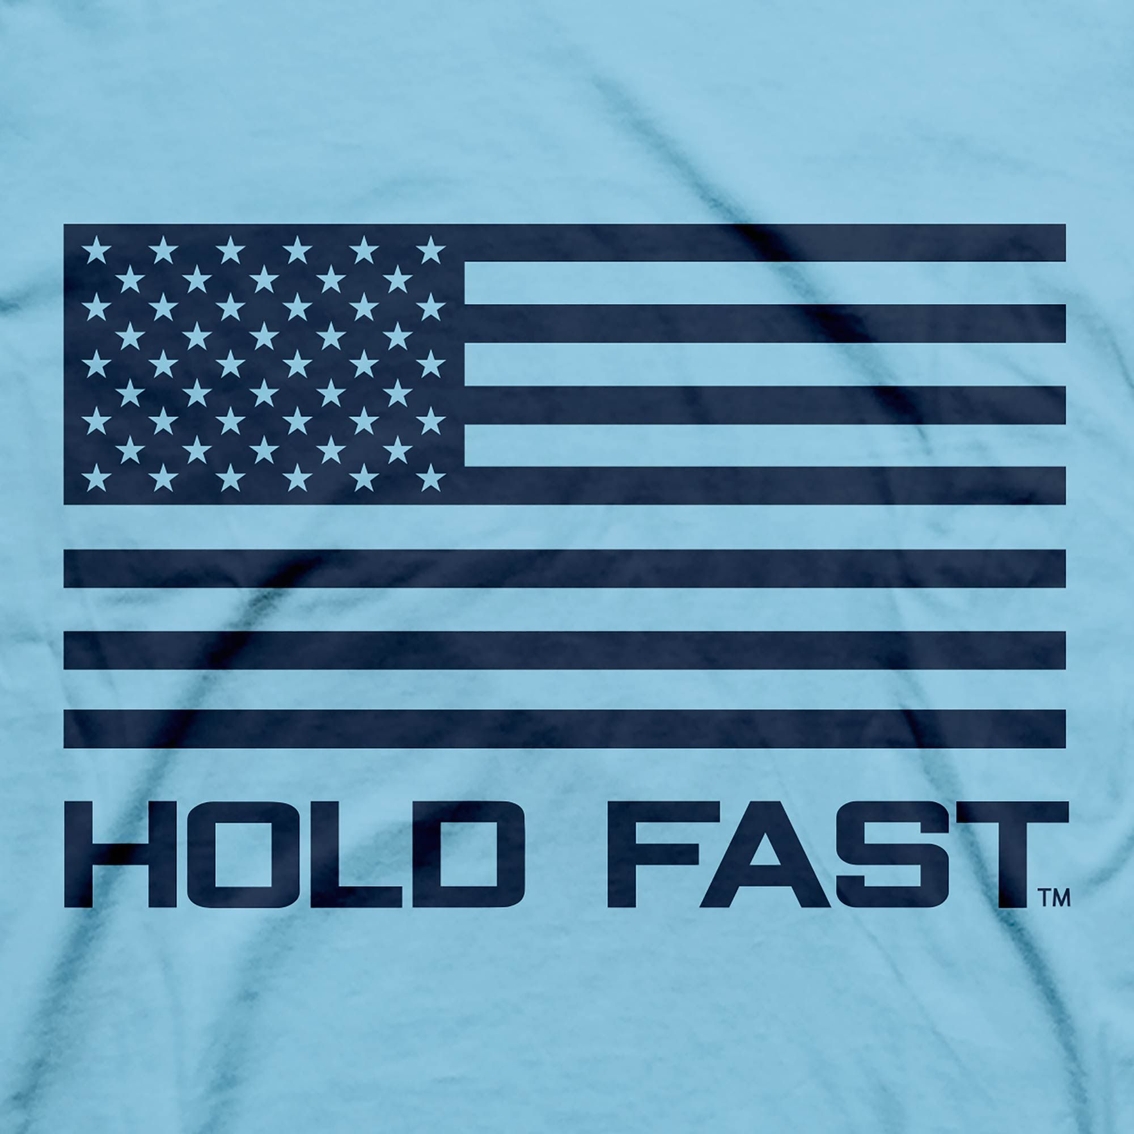 HOLD FAST Womens T-Shirt Rosie - Image 4 of 4